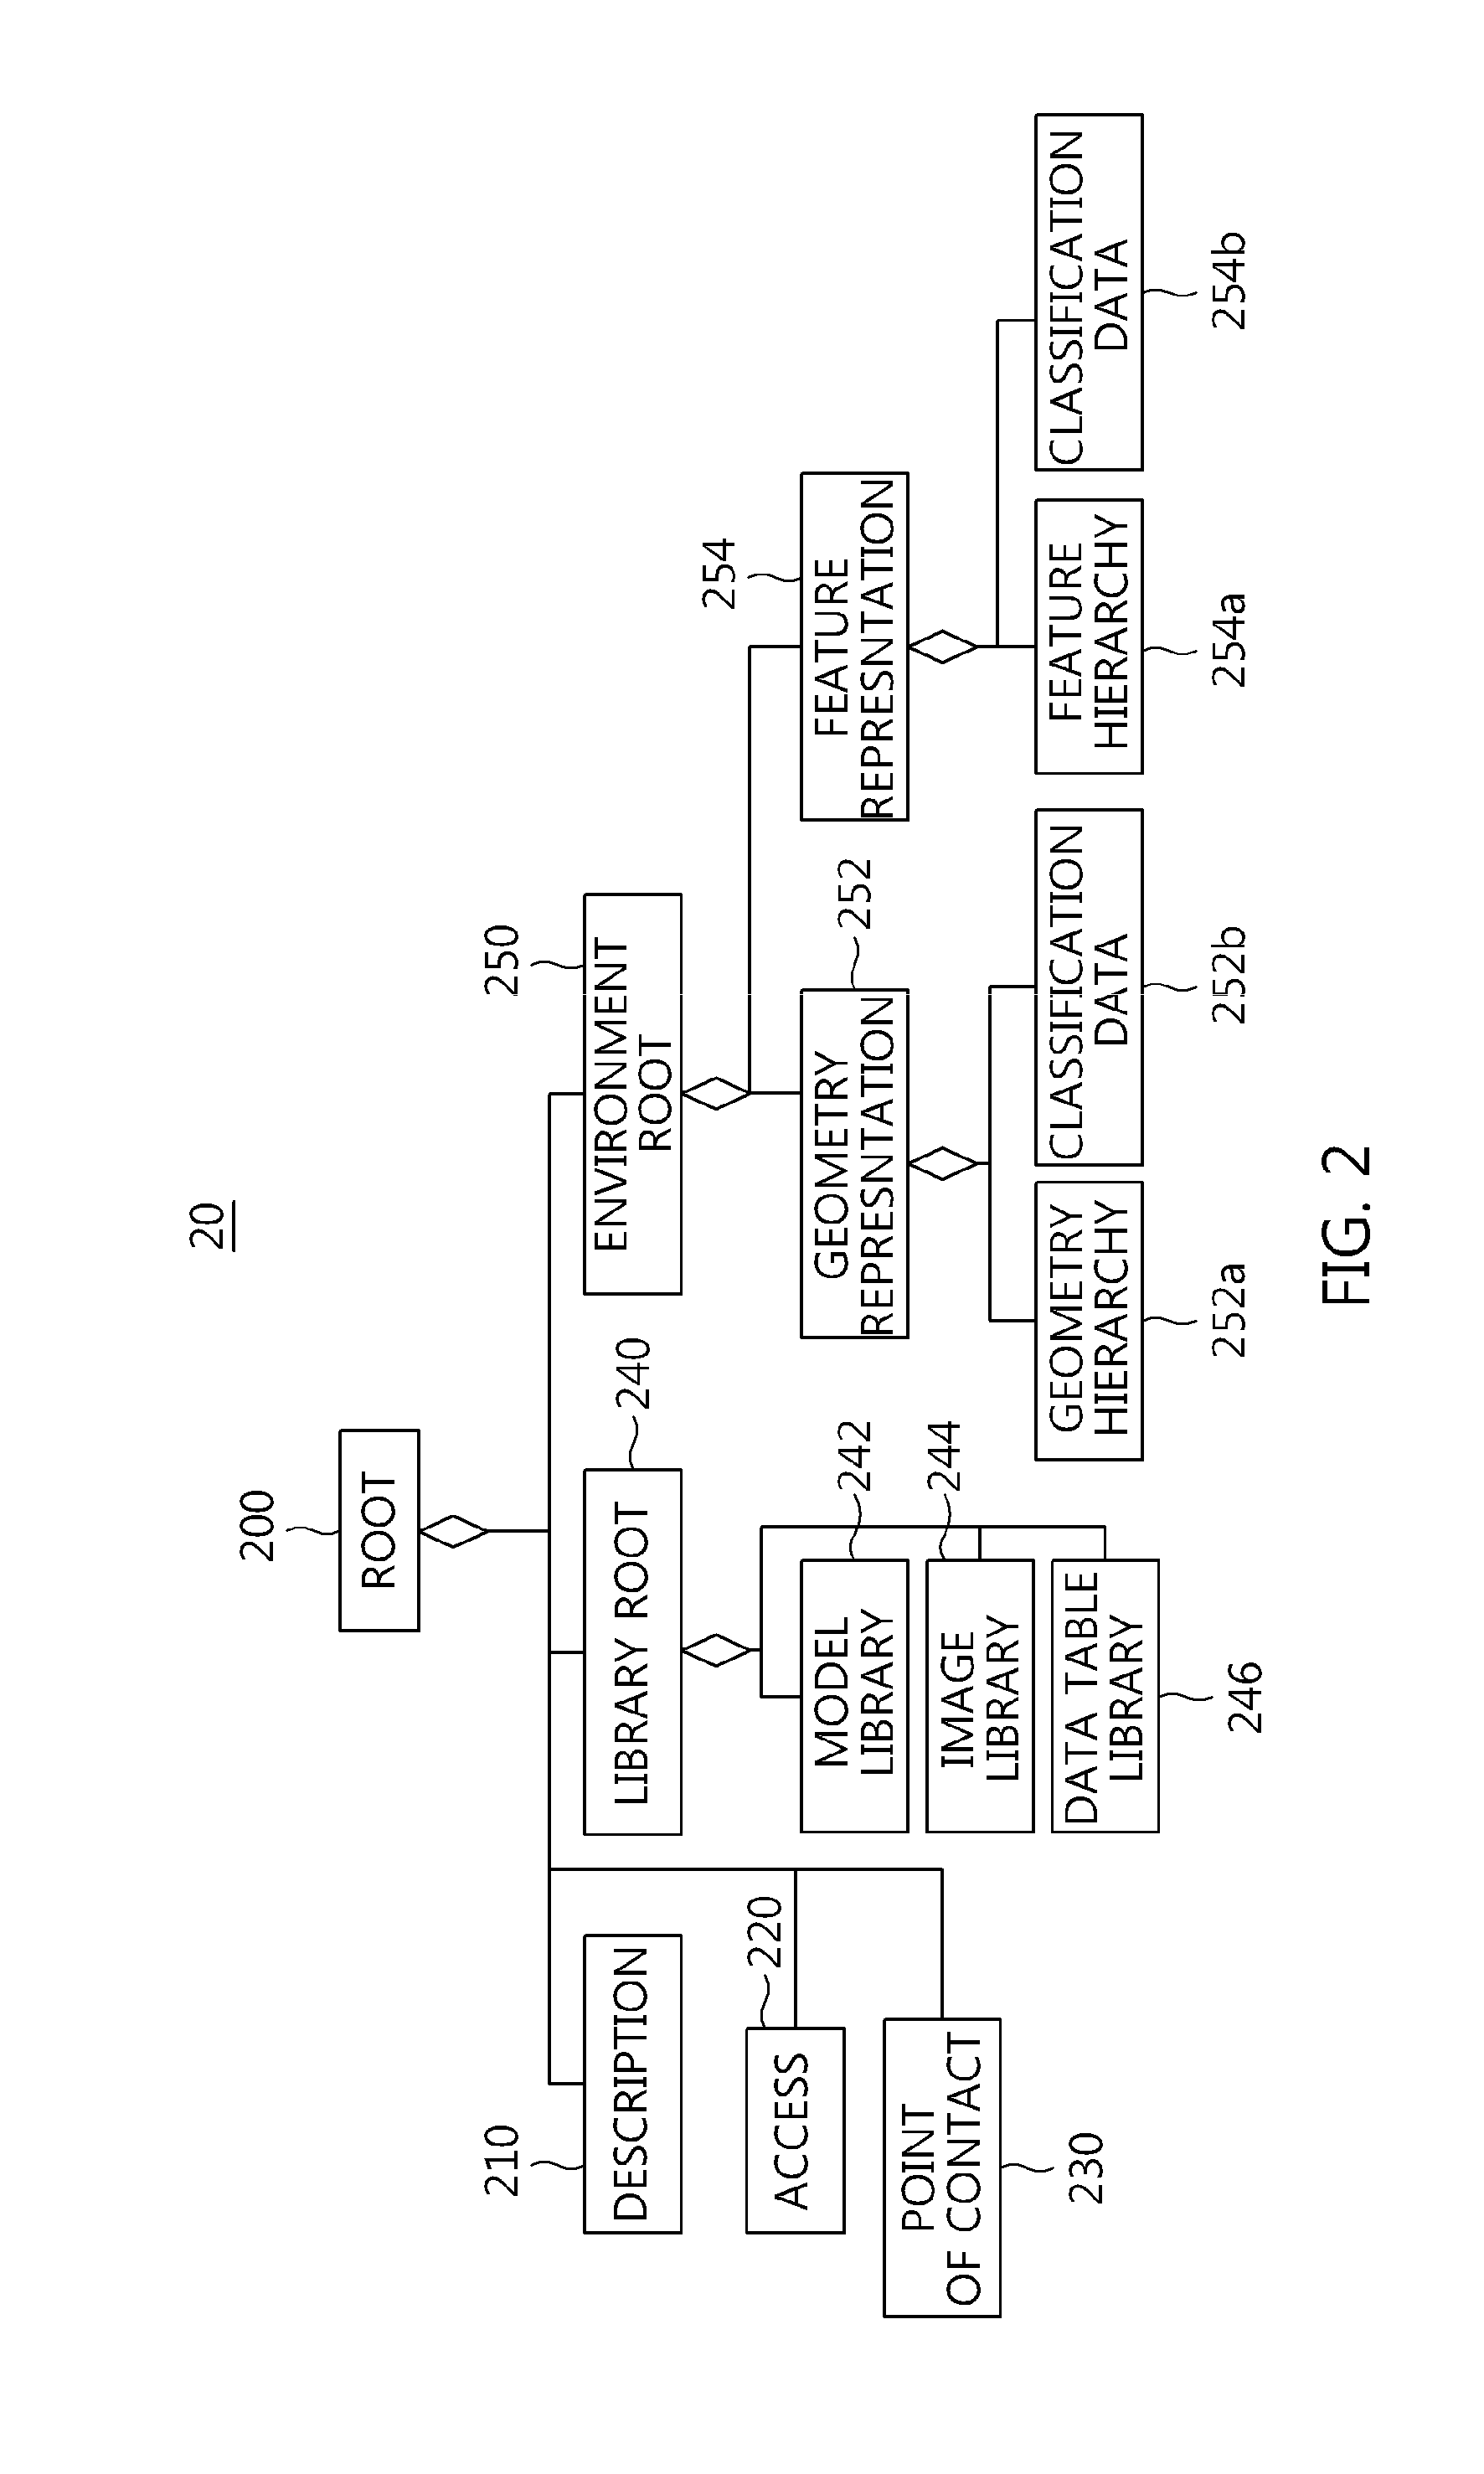 Method of representing environment object in cyber-physical system using environment data model structure and computer-readable storage medium storing program therefor